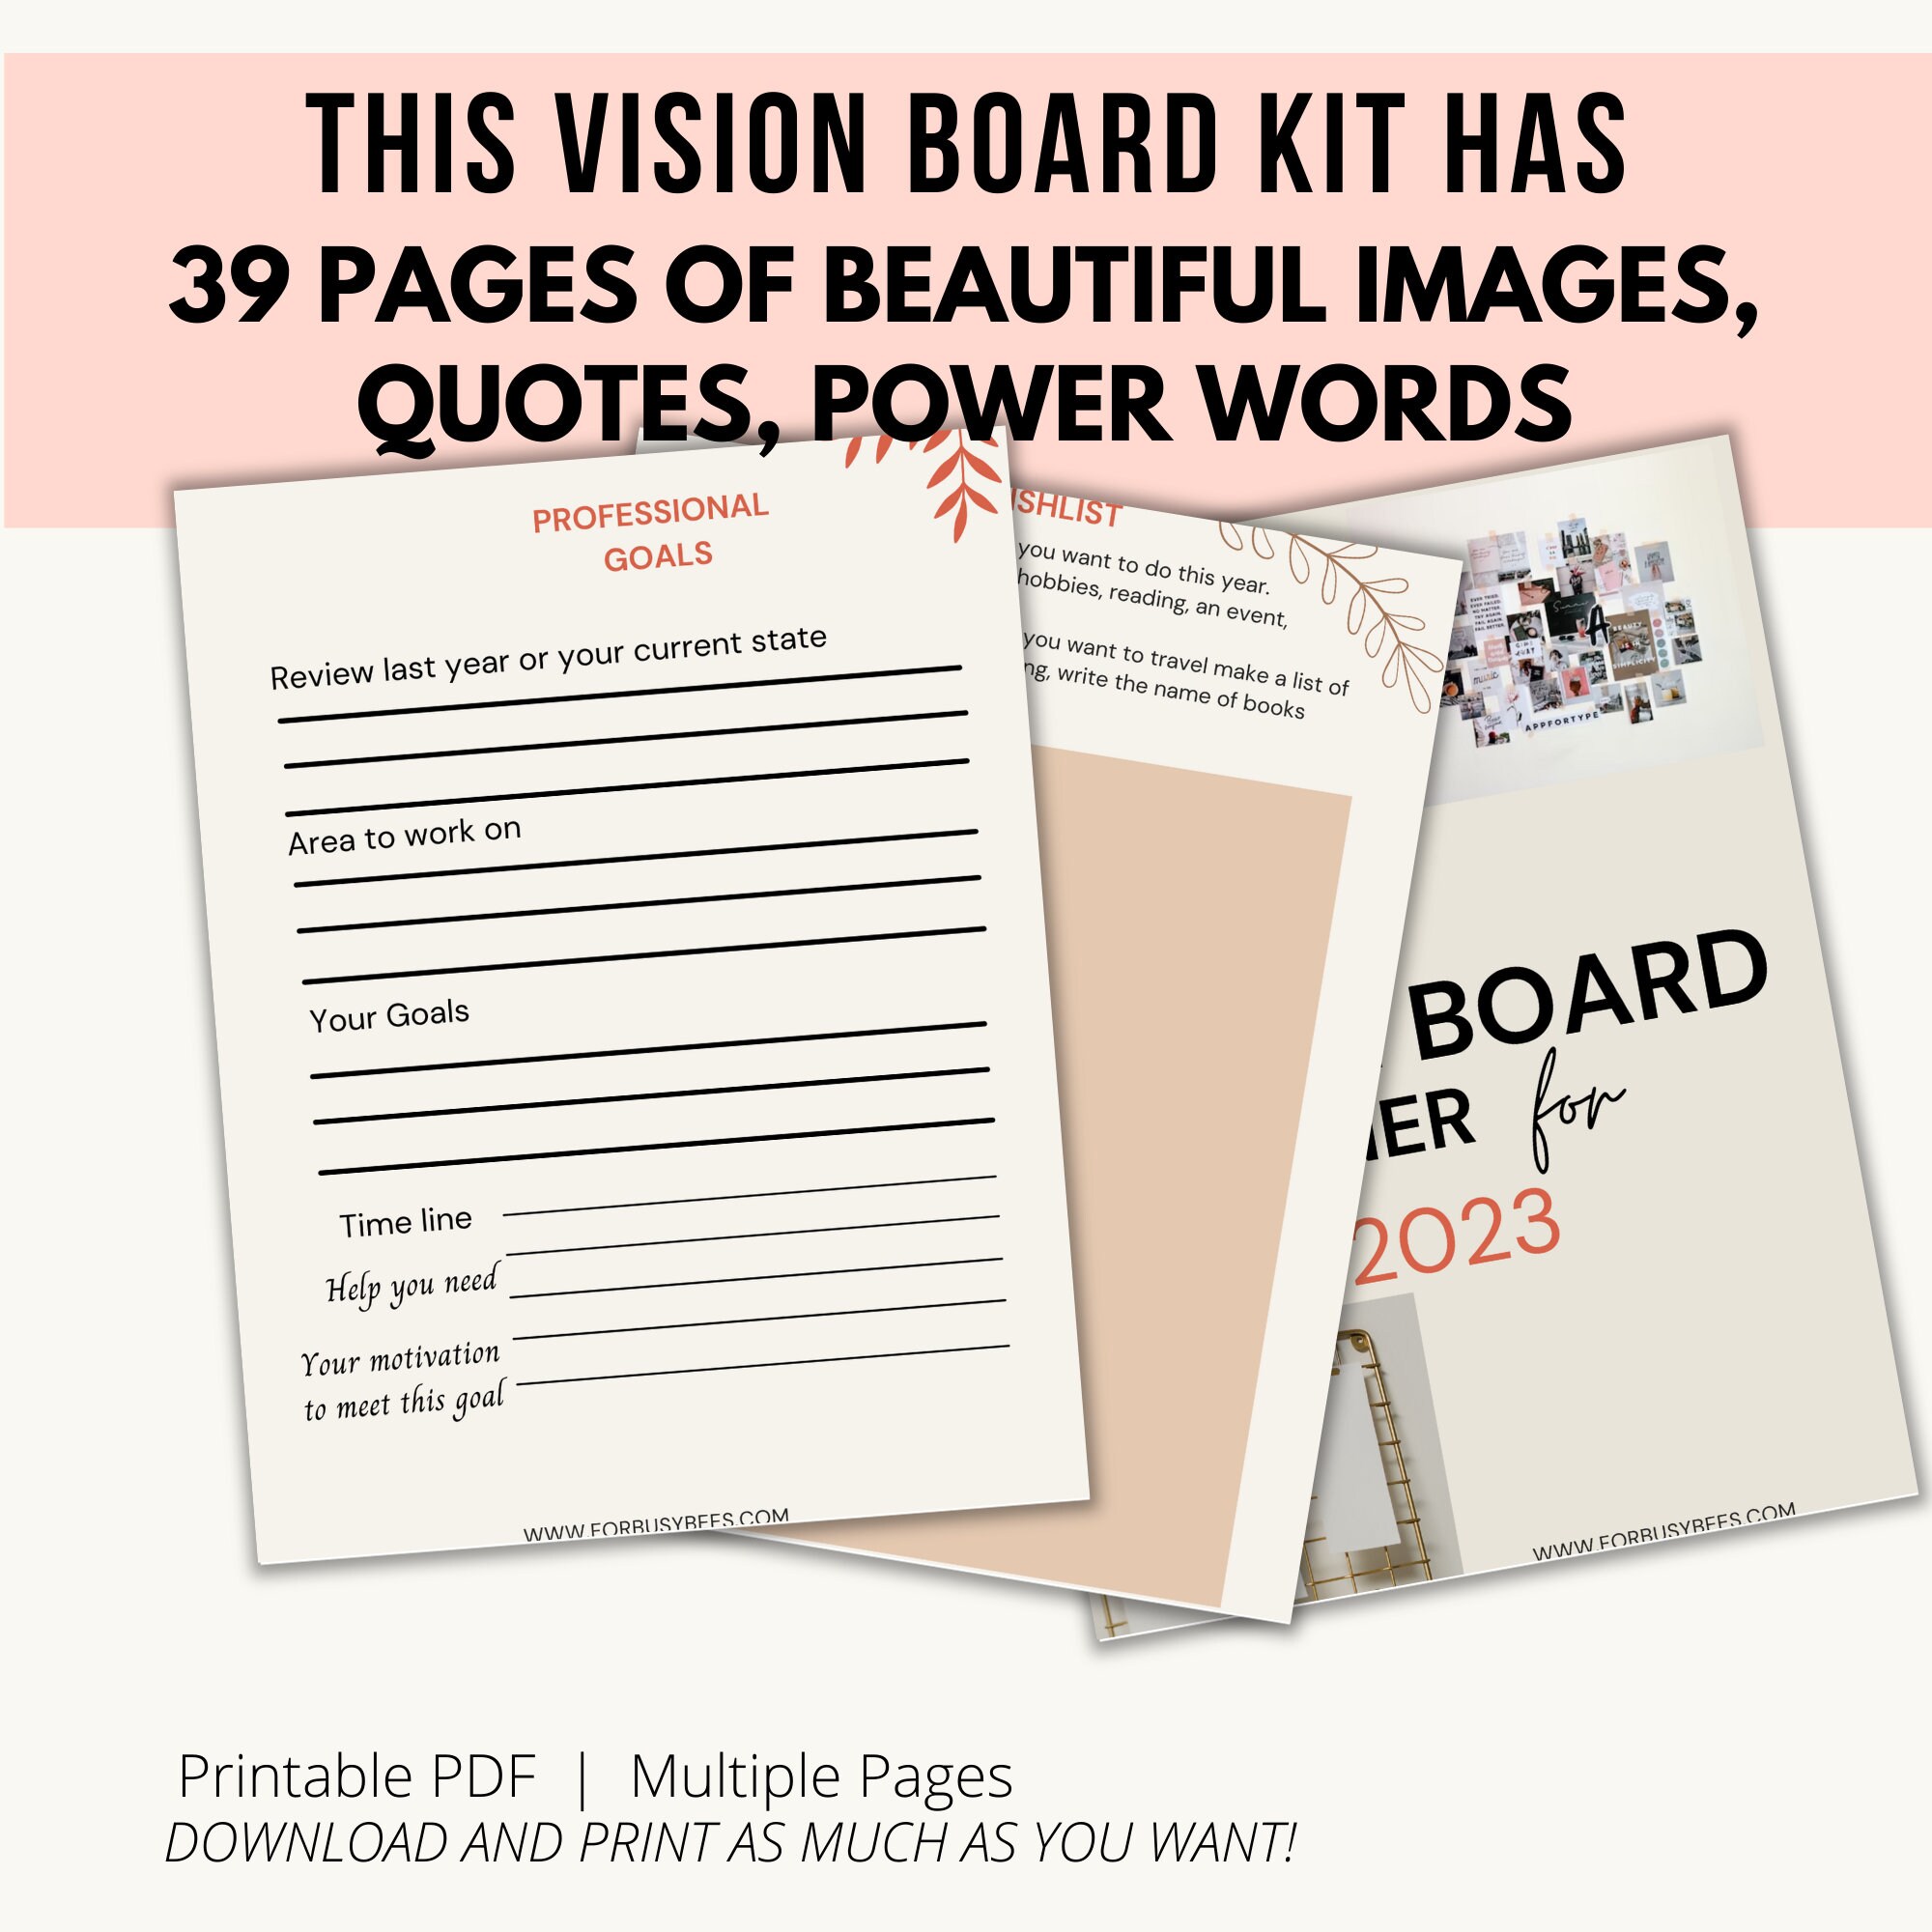 2023 Vision Board Sticker Pack Sticker for Sale by MarssyMT